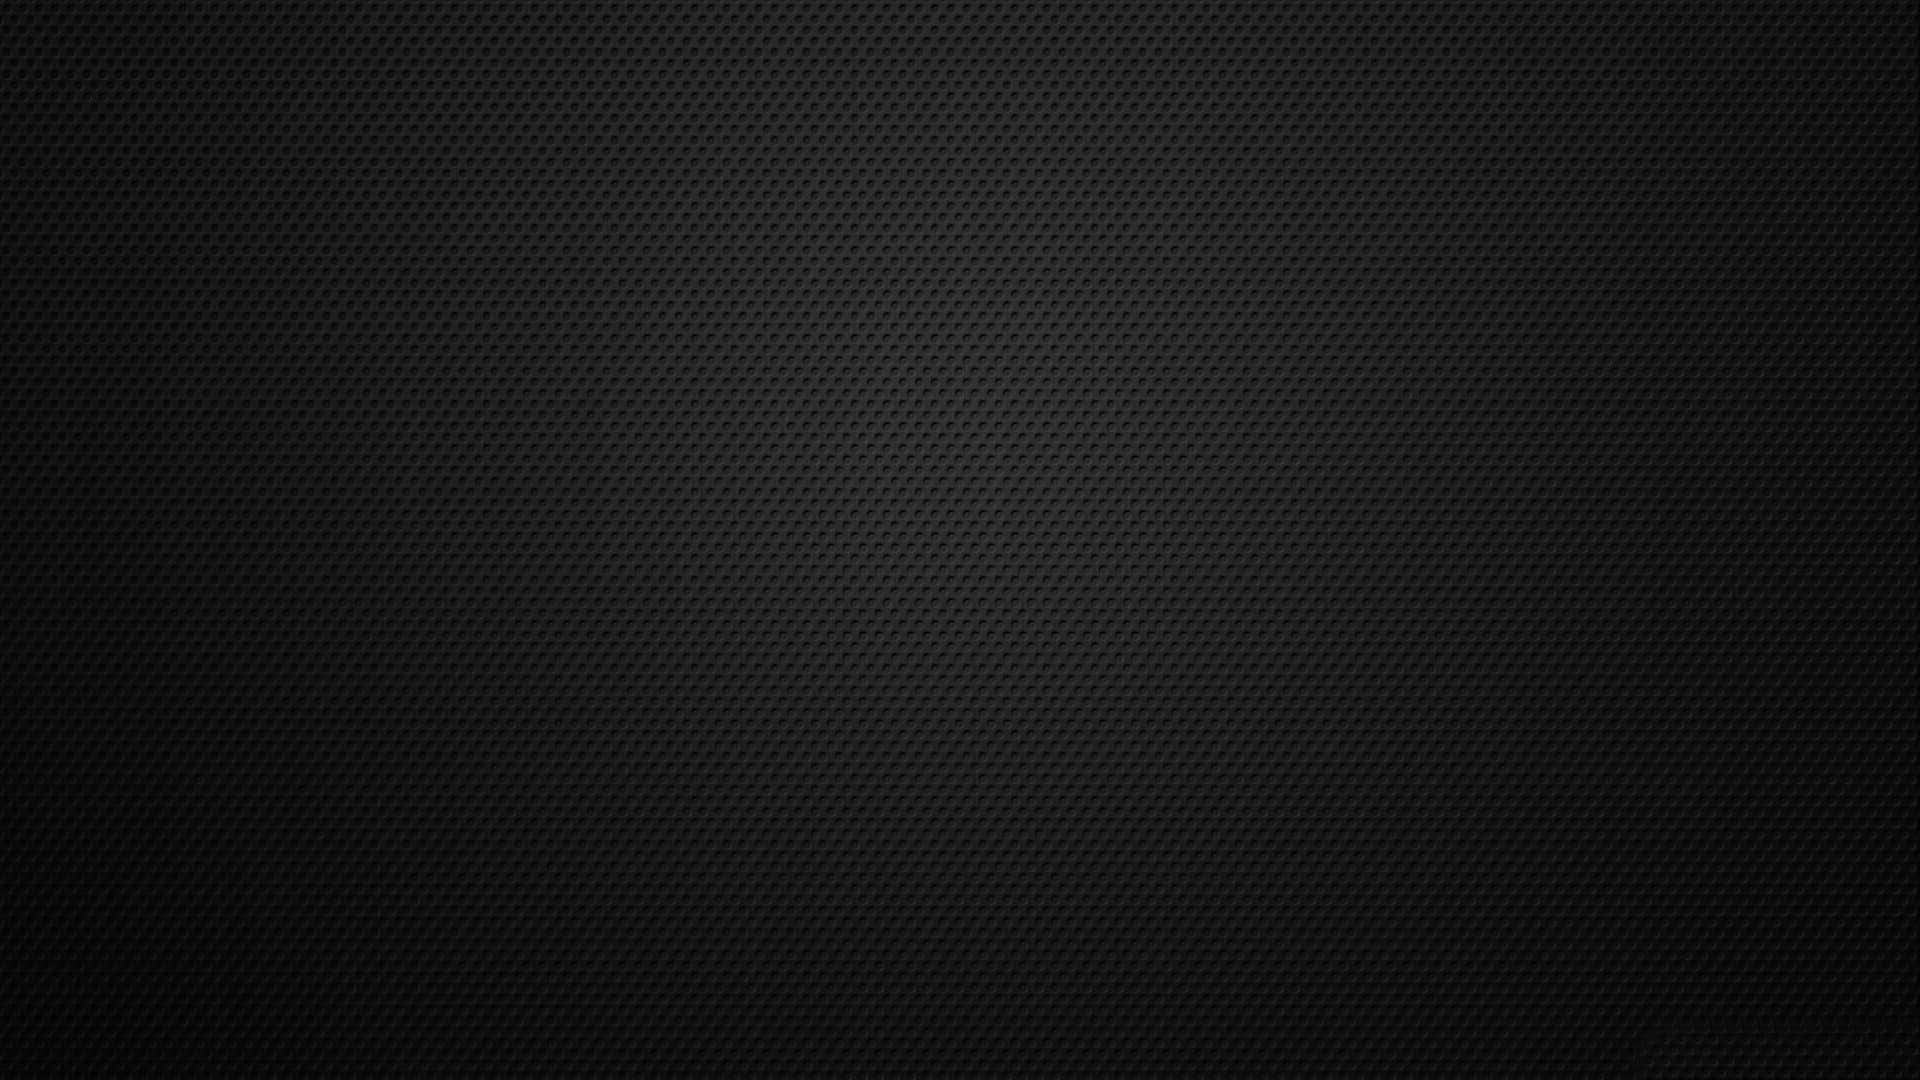 A Soothing Simple Black Background